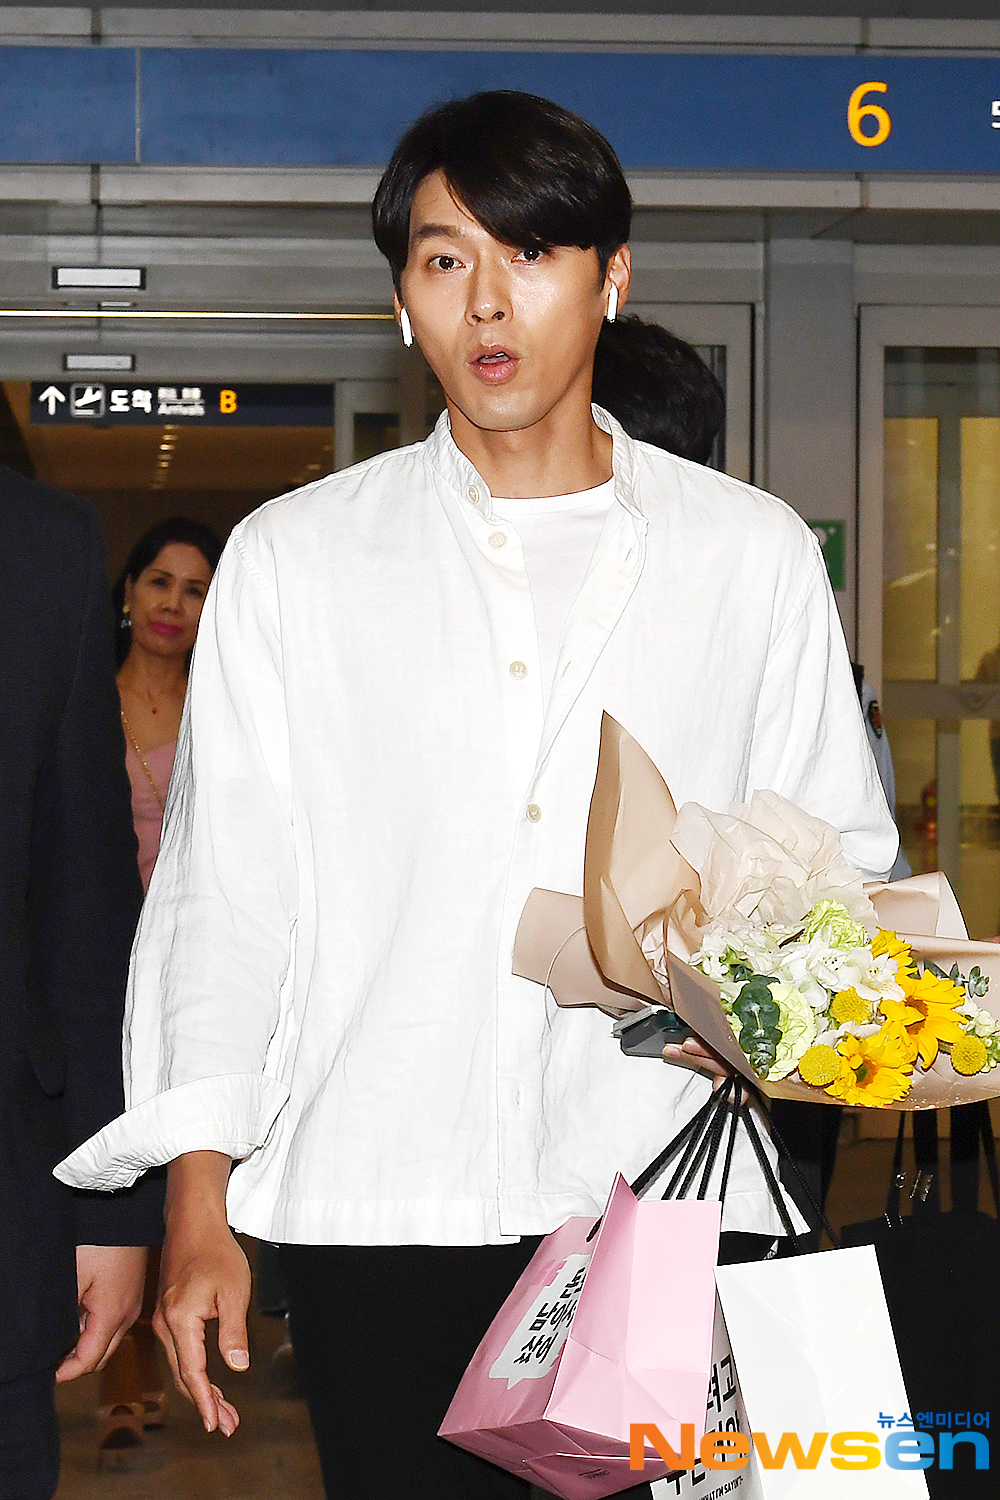 Actor Hyun Bin arrived in Hong Kong through Incheon International Airport in Unseo-dong, Jung-gu, Incheon on the afternoon of May 12 after completing the schedule of the LOG INTO THE SPACE -2019 Hyun Bin Fan Meeting Tour - in Hong Kong.Actor Hyun Bin is entering the country with an airport fashion.exponential earthquake